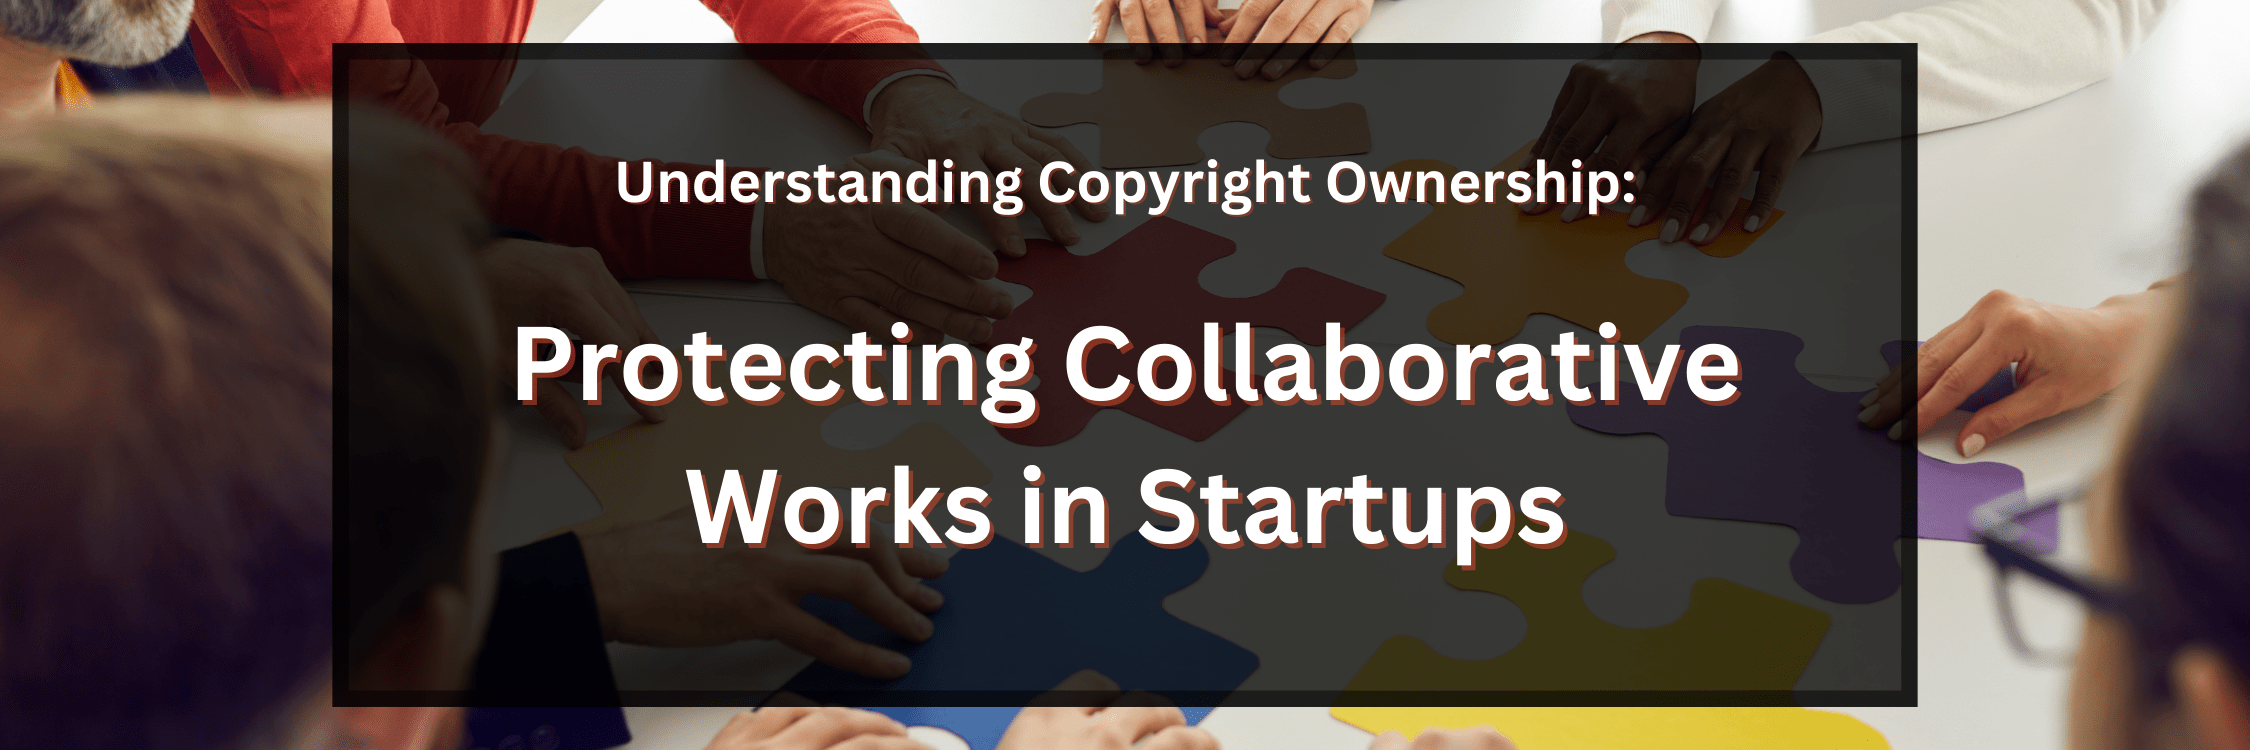 Understanding Copyright Ownership: Protecting Collaborative Works in Startups